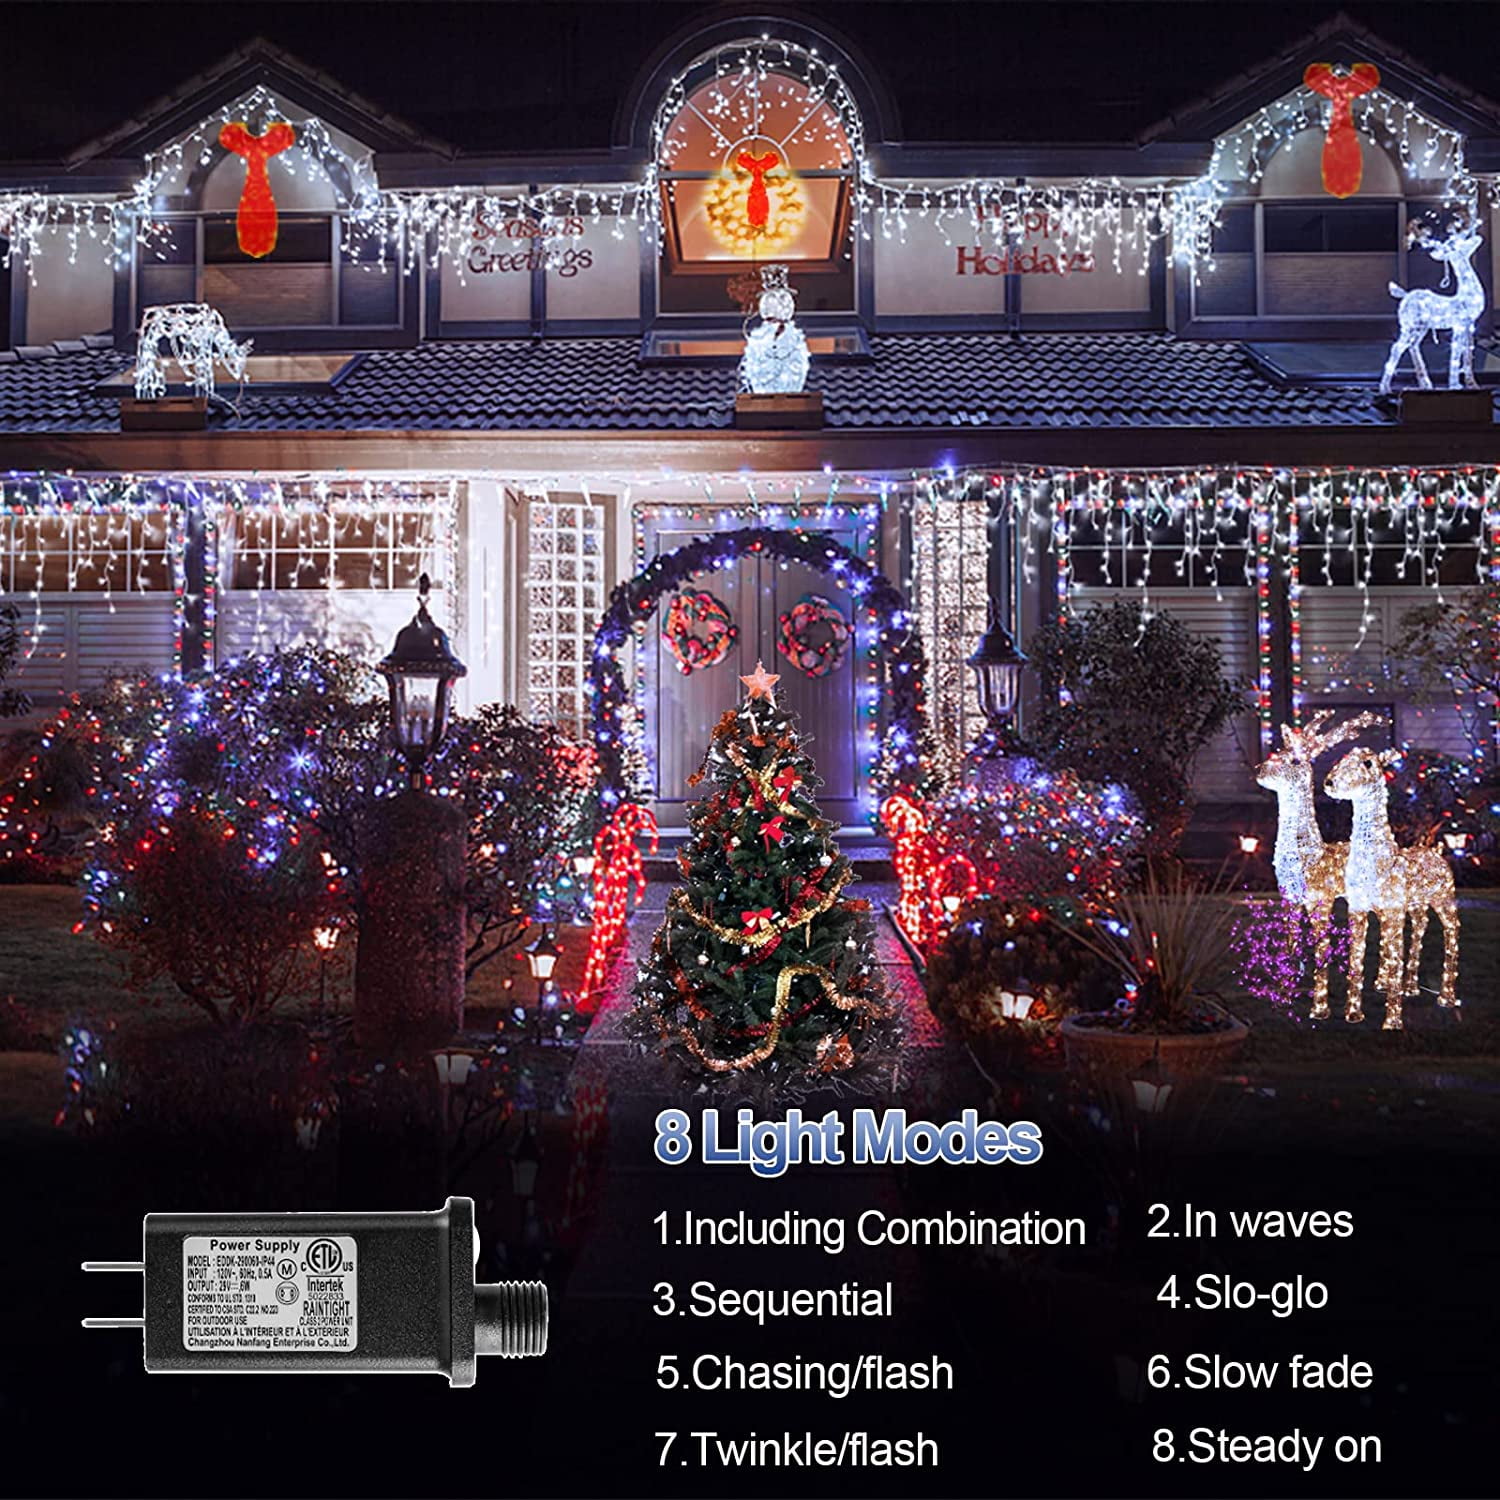 Jcwfuno Christmas Lights Super Long LED 131 FT LED String Lights with 240 Plug in 8 Modes Christmas Decoration for Holiday Wedding Party Bedroom Garden Patio Outdoor Indoor (Co - Walmart.com